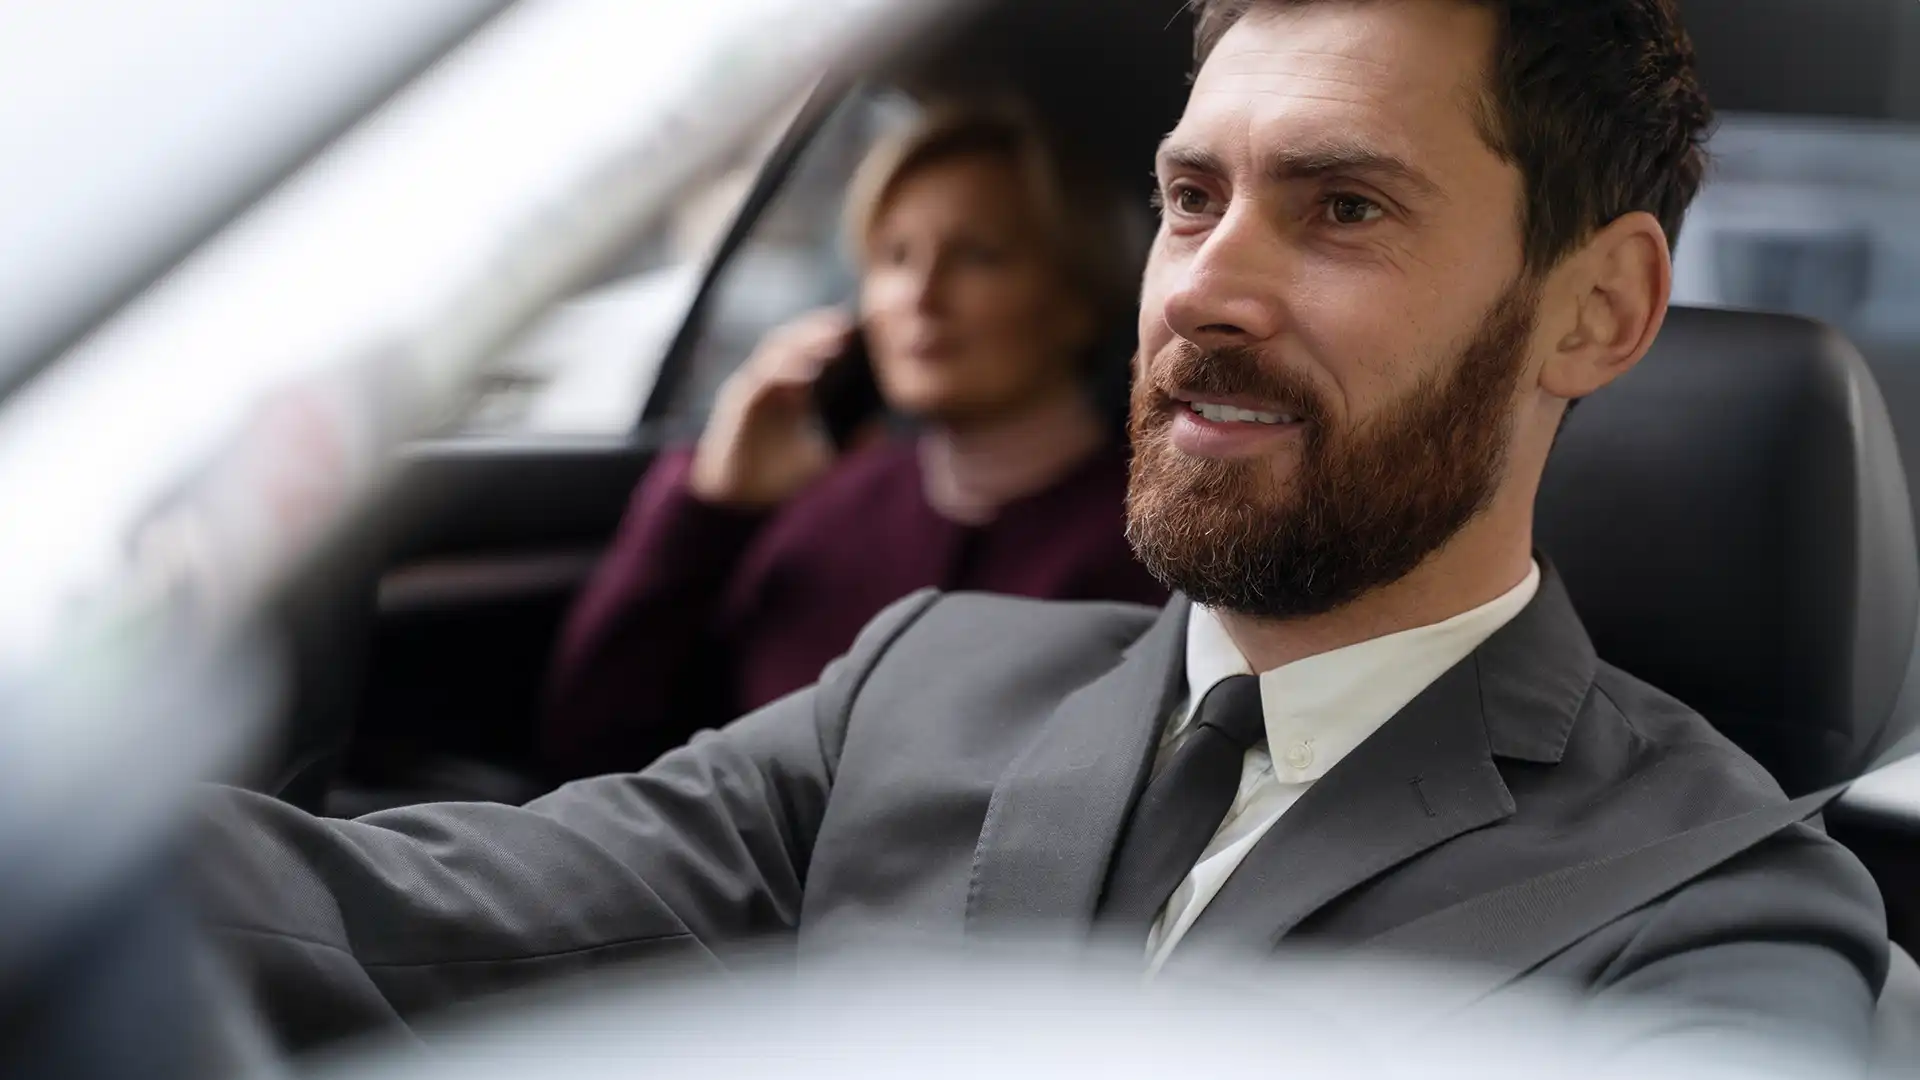 Foremost driver in a suit drives while smiling, with a woman on the phone in the backseat.